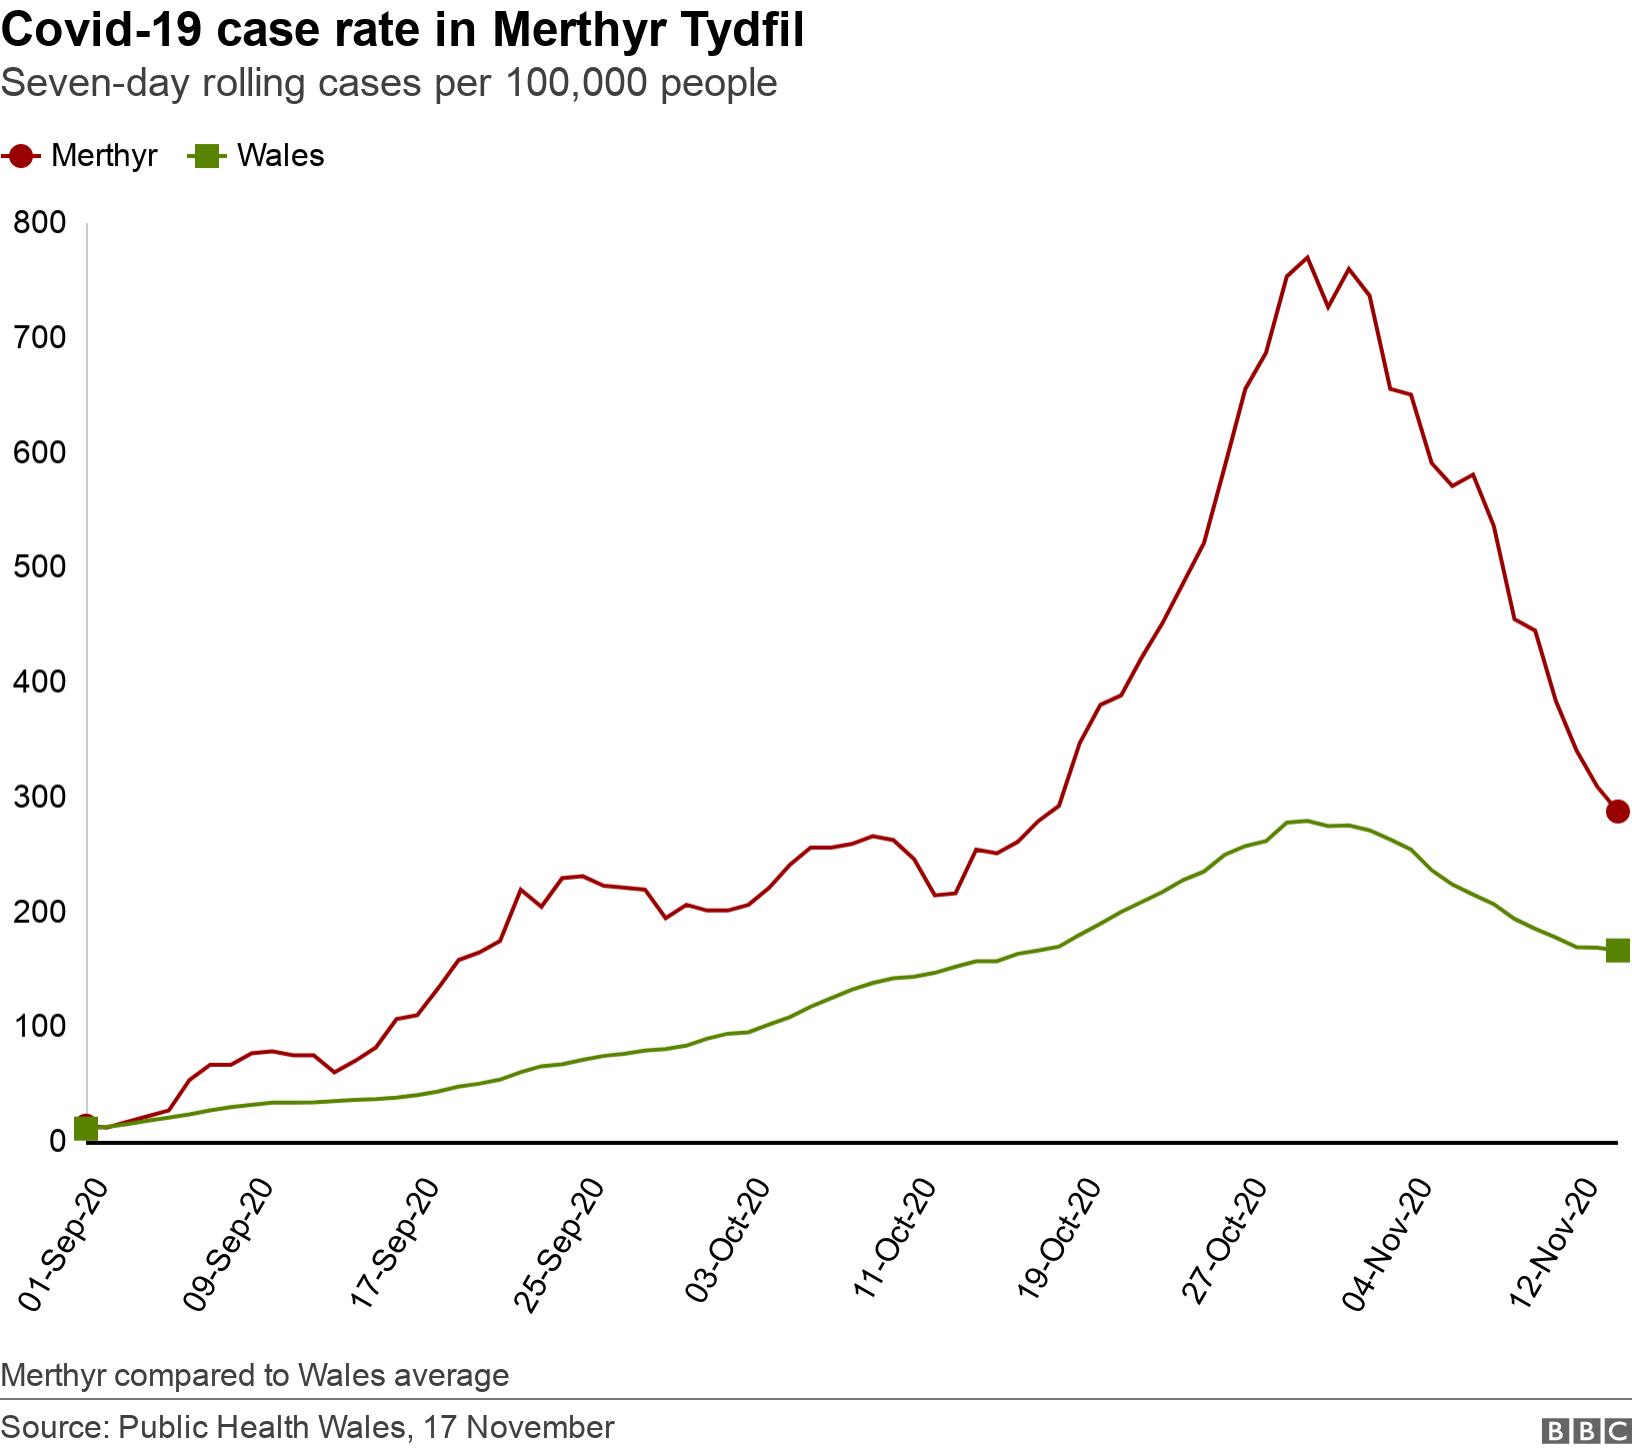 Covid-19 case rate in Merthyr Tydfil. Seven-day rolling cases per 100,000 people. Merthyr compared to Wales average.